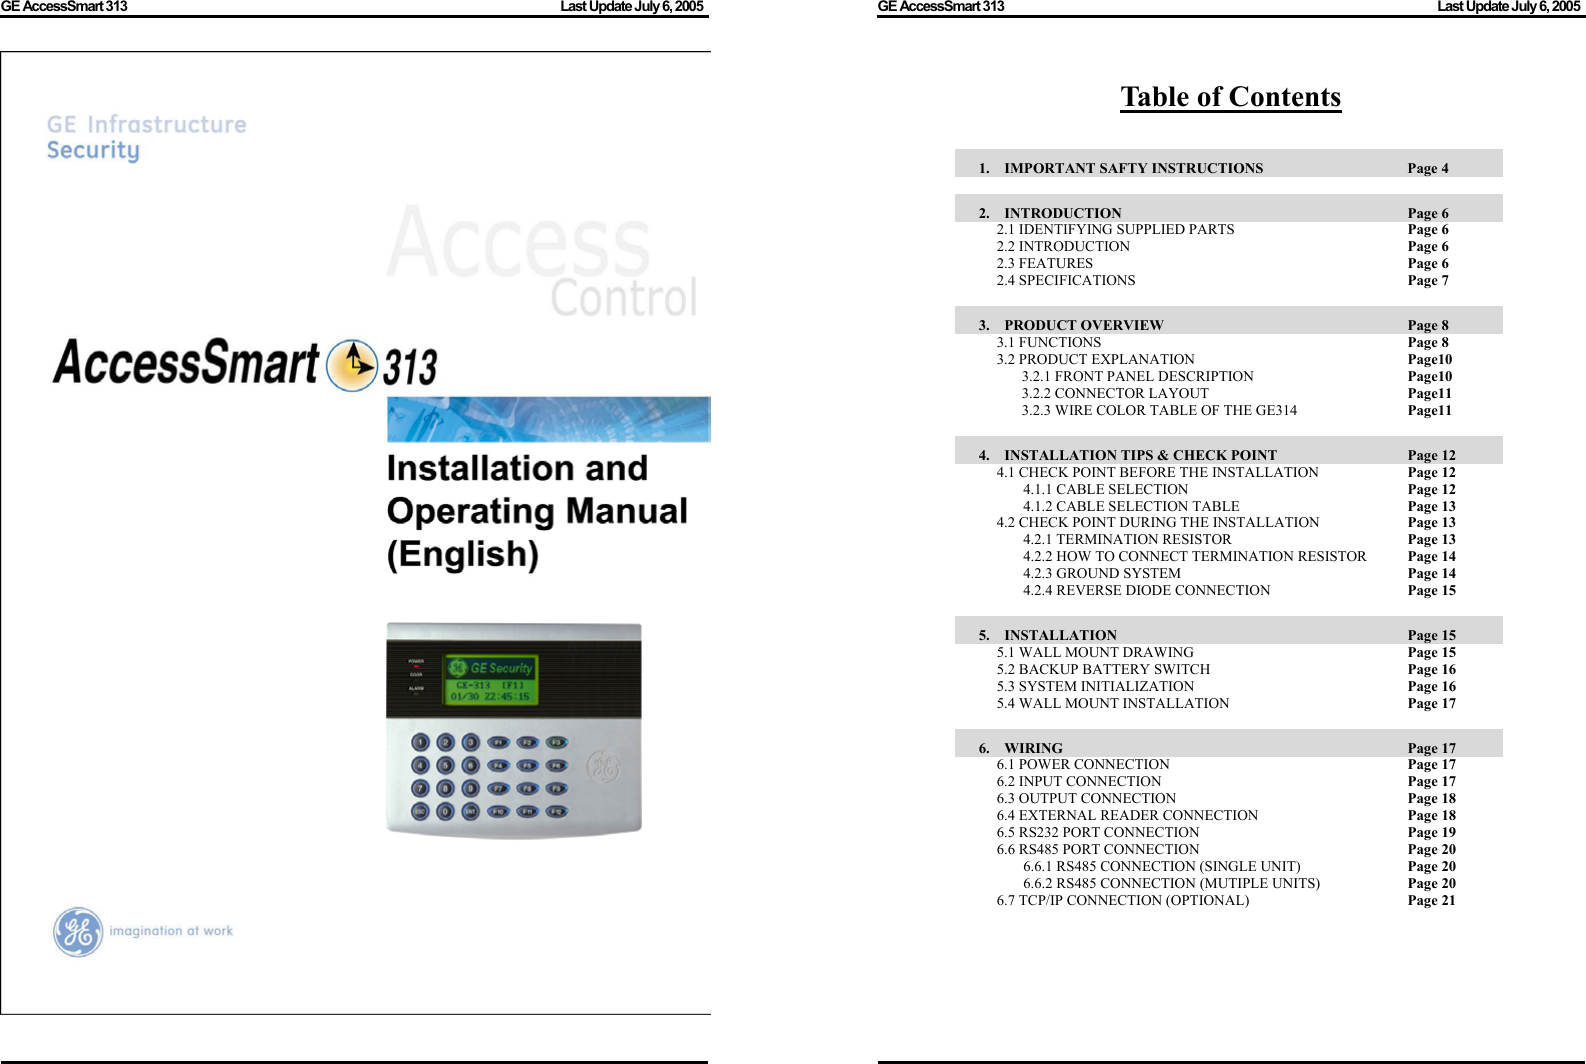 GE AccessSmart 313                                                                                         Last Update July 6, 2005   GE AccessSmart 313                                                                                         Last Update July 6, 2005   Table of Contents  1.  IMPORTANT SAFTY INSTRUCTIONS      Page 4  2.  INTRODUCTION               Page 6 2.1 IDENTIFYING SUPPLIED PARTS        Page 6 2.2 INTRODUCTION      Page 6 2.3 FEATURES       Page 6 2.4 SPECIFICATIONS      Page 7  3.  PRODUCT OVERVIEW              Page 8 3.1 FUNCTIONS       Page 8 3.2 PRODUCT EXPLANATION        Page10 3.2.1 FRONT PANEL DESCRIPTION      Page10 3.2.2 CONNECTOR LAYOUT    Page11 3.2.3 WIRE COLOR TABLE OF THE GE314    Page11  4.  INSTALLATION TIPS &amp; CHECK POINT           Page 12 4.1 CHECK POINT BEFORE THE INSTALLATION      Page 12 4.1.1 CABLE SELECTION          Page 12 4.1.2 CABLE SELECTION TABLE        Page 13 4.2 CHECK POINT DURING THE INSTALLATION      Page 13 4.2.1 TERMINATION RESISTOR        Page 13 4.2.2 HOW TO CONNECT TERMINATION RESISTOR    Page 14 4.2.3 GROUND SYSTEM     Page 14 4.2.4 REVERSE DIODE CONNECTION        Page 15  5.  INSTALLATION               Page 15 5.1 WALL MOUNT DRAWING          Page 15 5.2 BACKUP BATTERY SWITCH     Page 16 5.3 SYSTEM INITIALIZATION            Page 16 5.4 WALL MOUNT INSTALLATION        Page 17  6.  WIRING                 Page 17 6.1 POWER CONNECTION     Page 17 6.2 INPUT CONNECTION      Page 17 6.3 OUTPUT CONNECTION          Page 18 6.4 EXTERNAL READER CONNECTION        Page 18 6.5 RS232 PORT CONNECTION          Page 19 6.6 RS485 PORT CONNECTION          Page 20 6.6.1 RS485 CONNECTION (SINGLE UNIT)      Page 20 6.6.2 RS485 CONNECTION (MUTIPLE UNITS)      Page 20 6.7 TCP/IP CONNECTION (OPTIONAL)        Page 21        